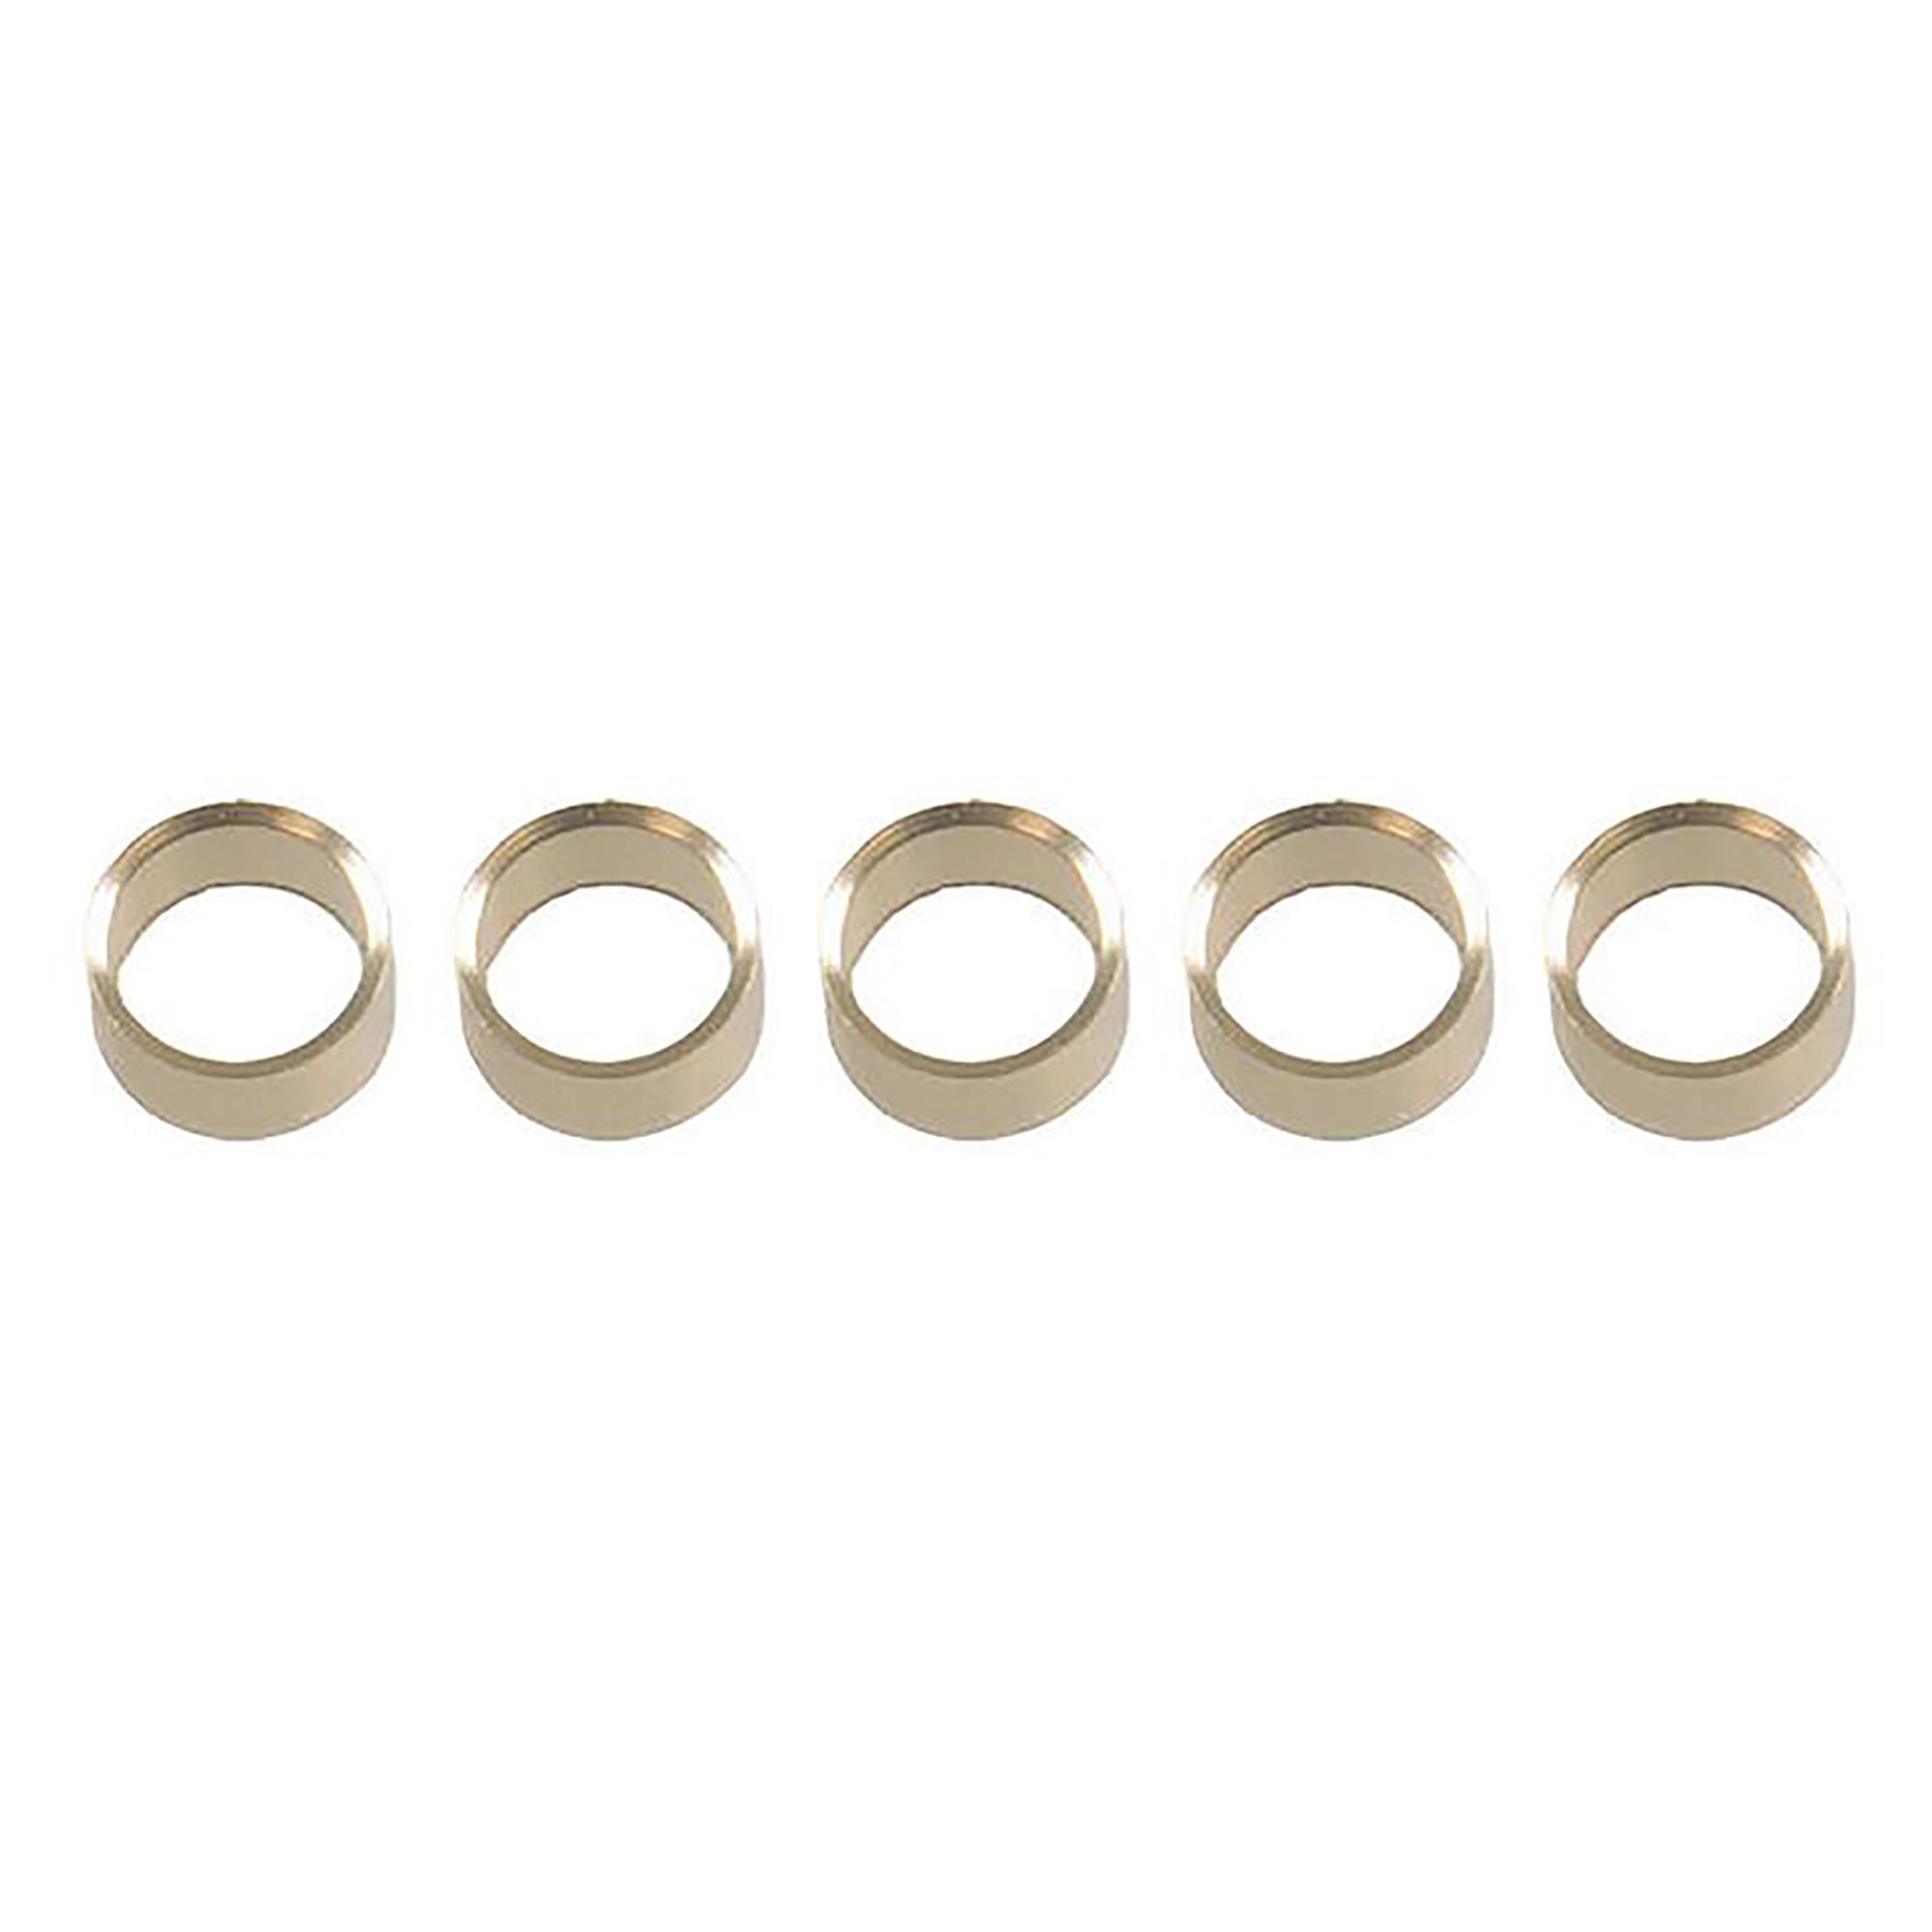 Joysway 880550 Dragon Force 65 Protection Metal Ring For Jib Boom (Pack of 5)